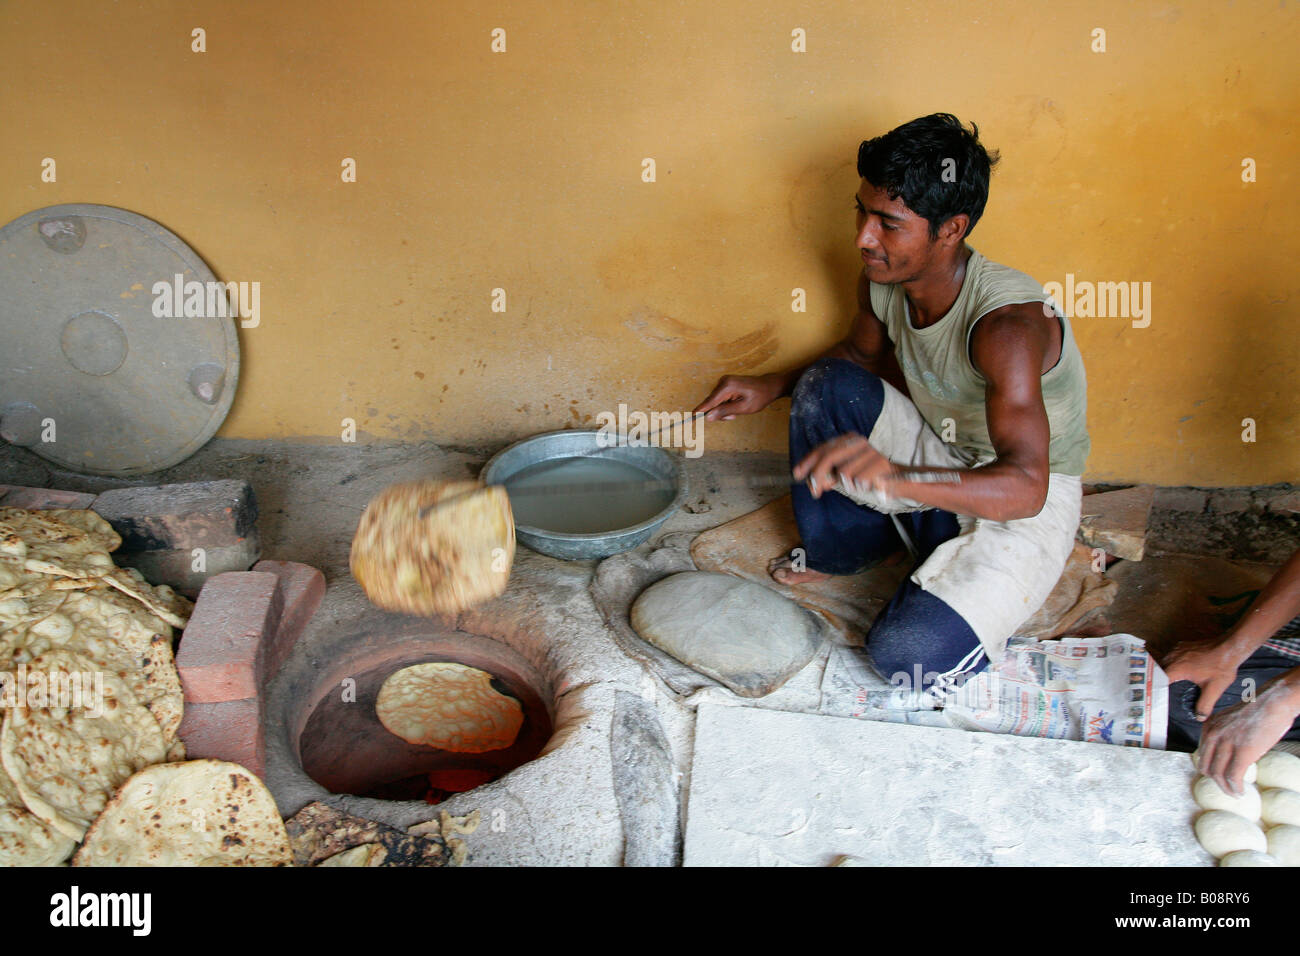 Man taking naan bread out of the oven, Bareilly, Uttar Pradesh, India, Asia Stock Photo